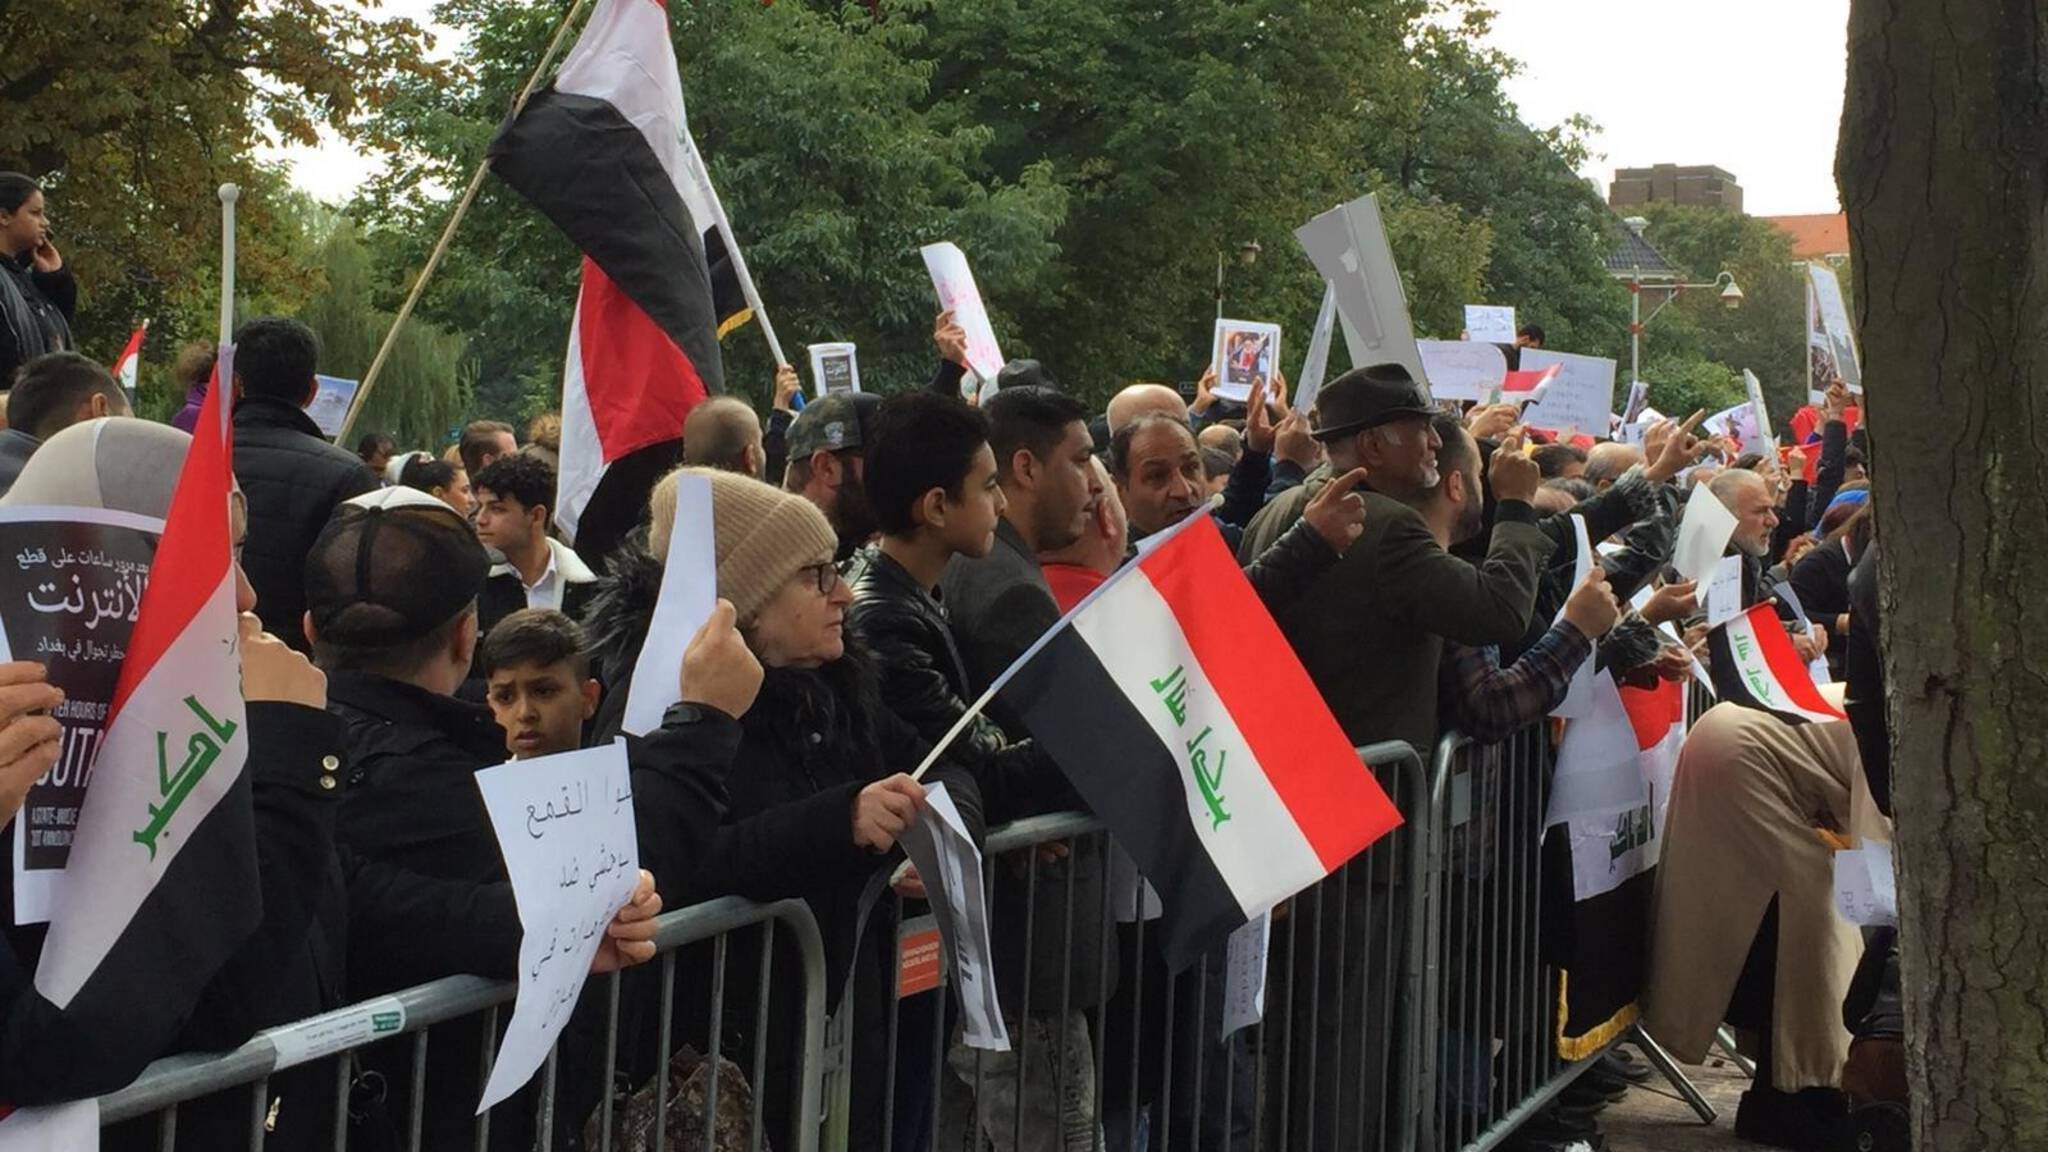 Iraqi refugees' solidarity demonstration with protests in Iraq, in The Hague, the Netherlands, photo by NOS